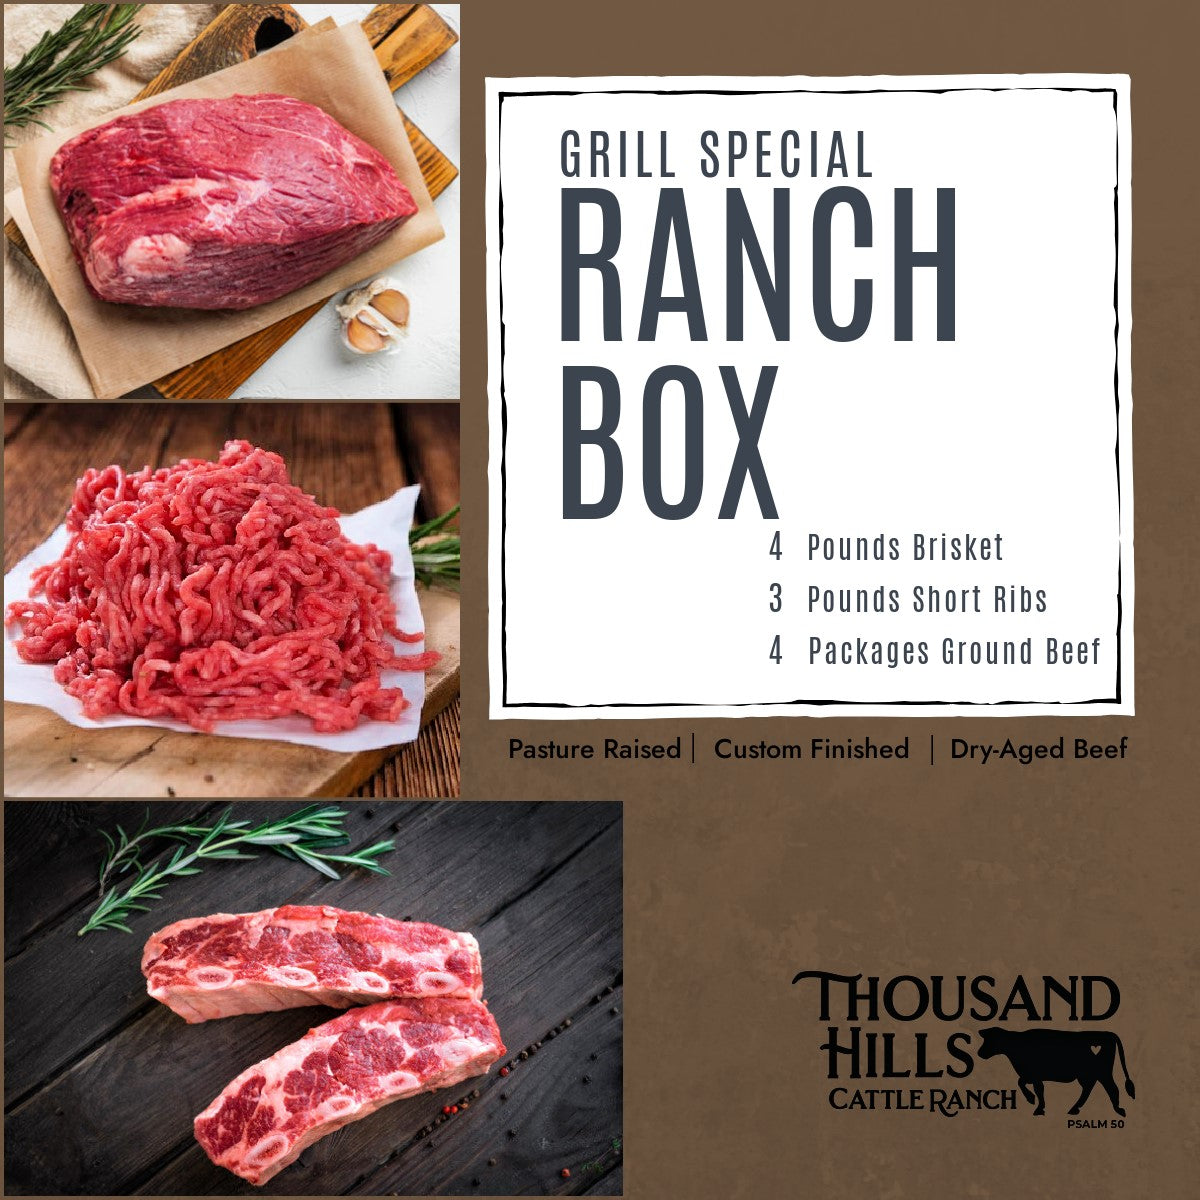 3. Grill Special Ranch Box